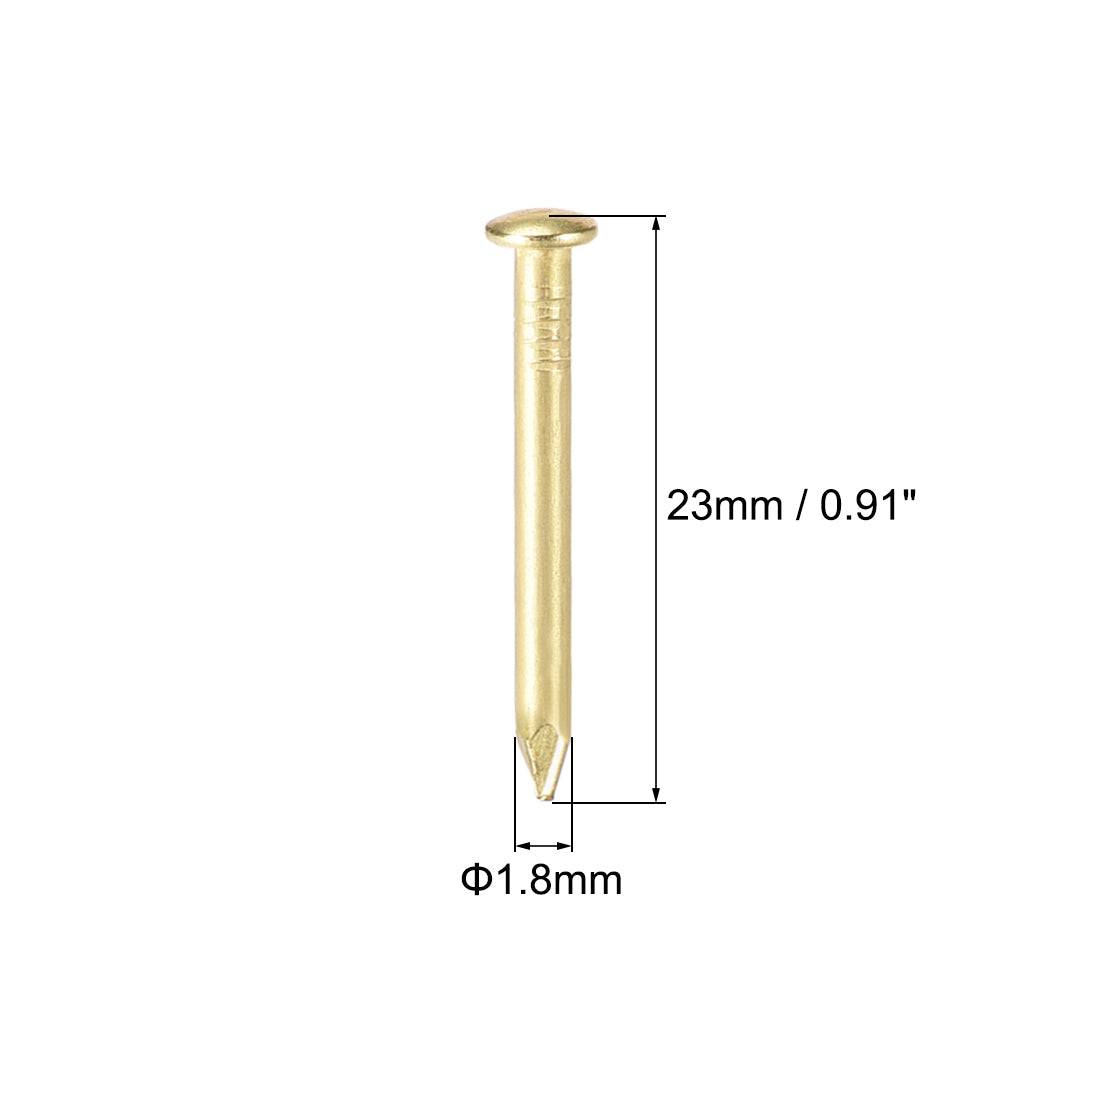 Uxcell Uxcell Small Tiny Nails 1.5X8mm for DIY Decorative Wooden Boxes Gold Tone 100pcs